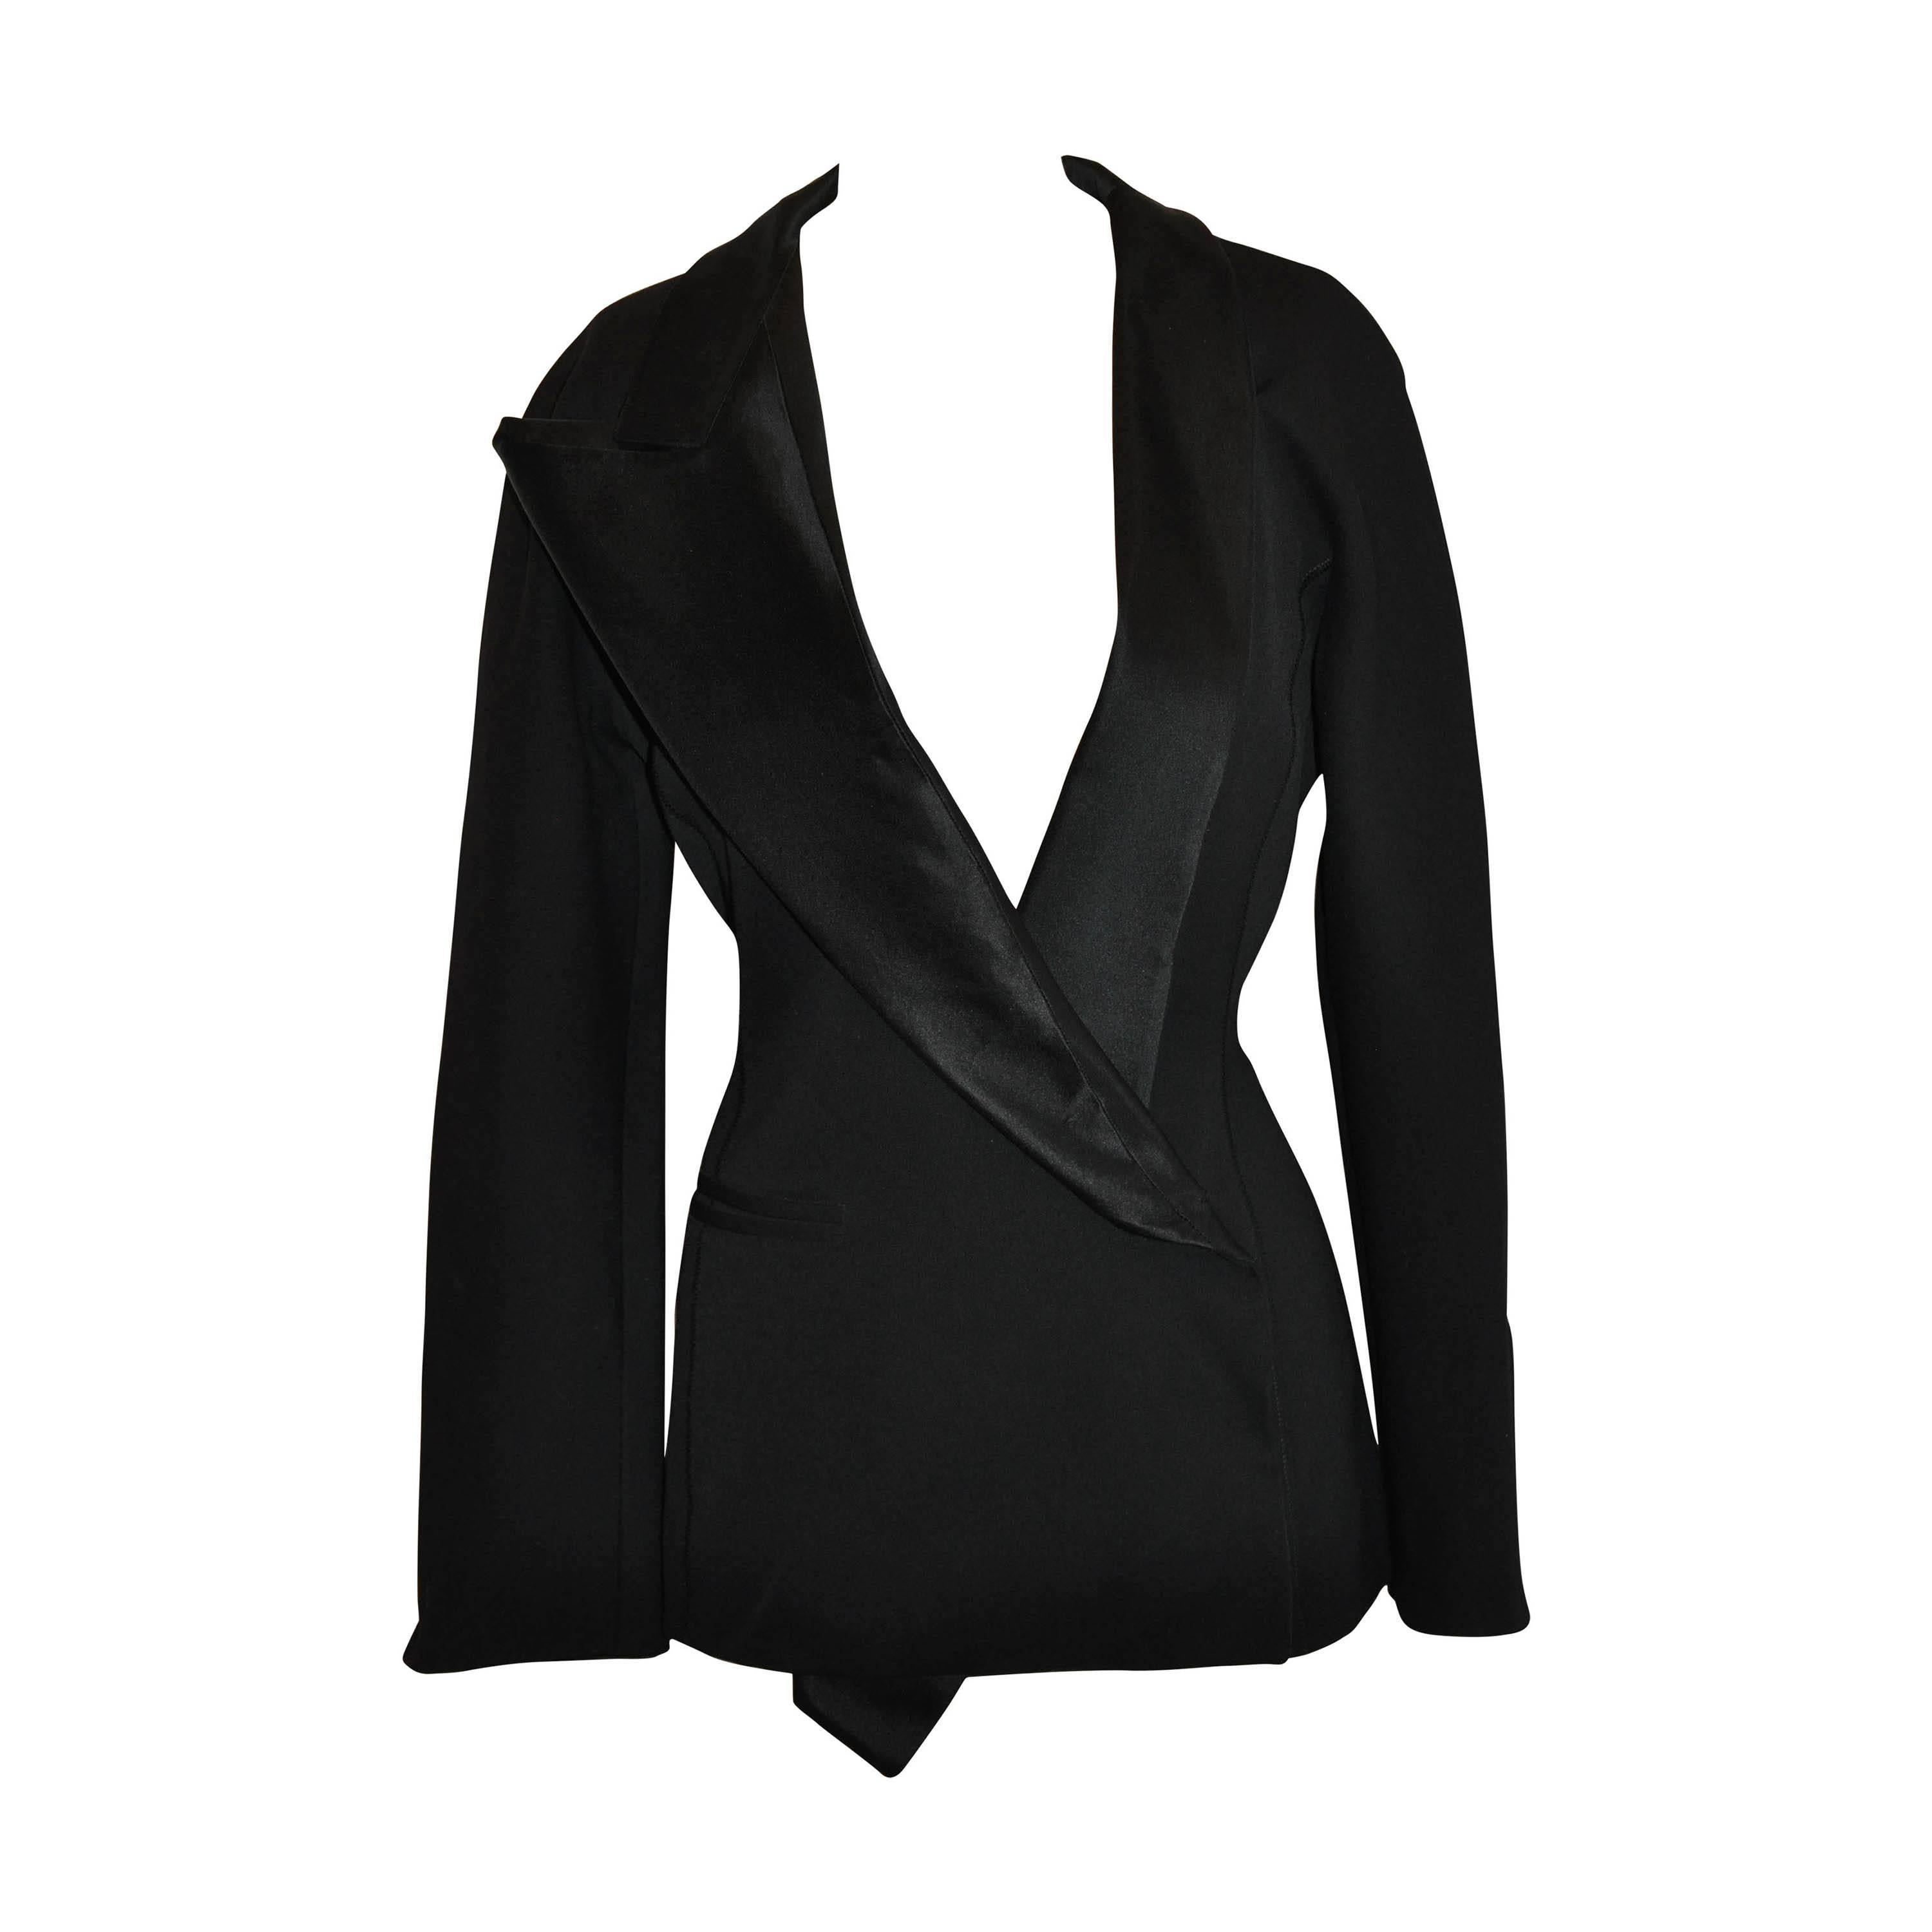 Claude Montana Signature Form-Fitting Black Accented with Silk Satin Jacket For Sale